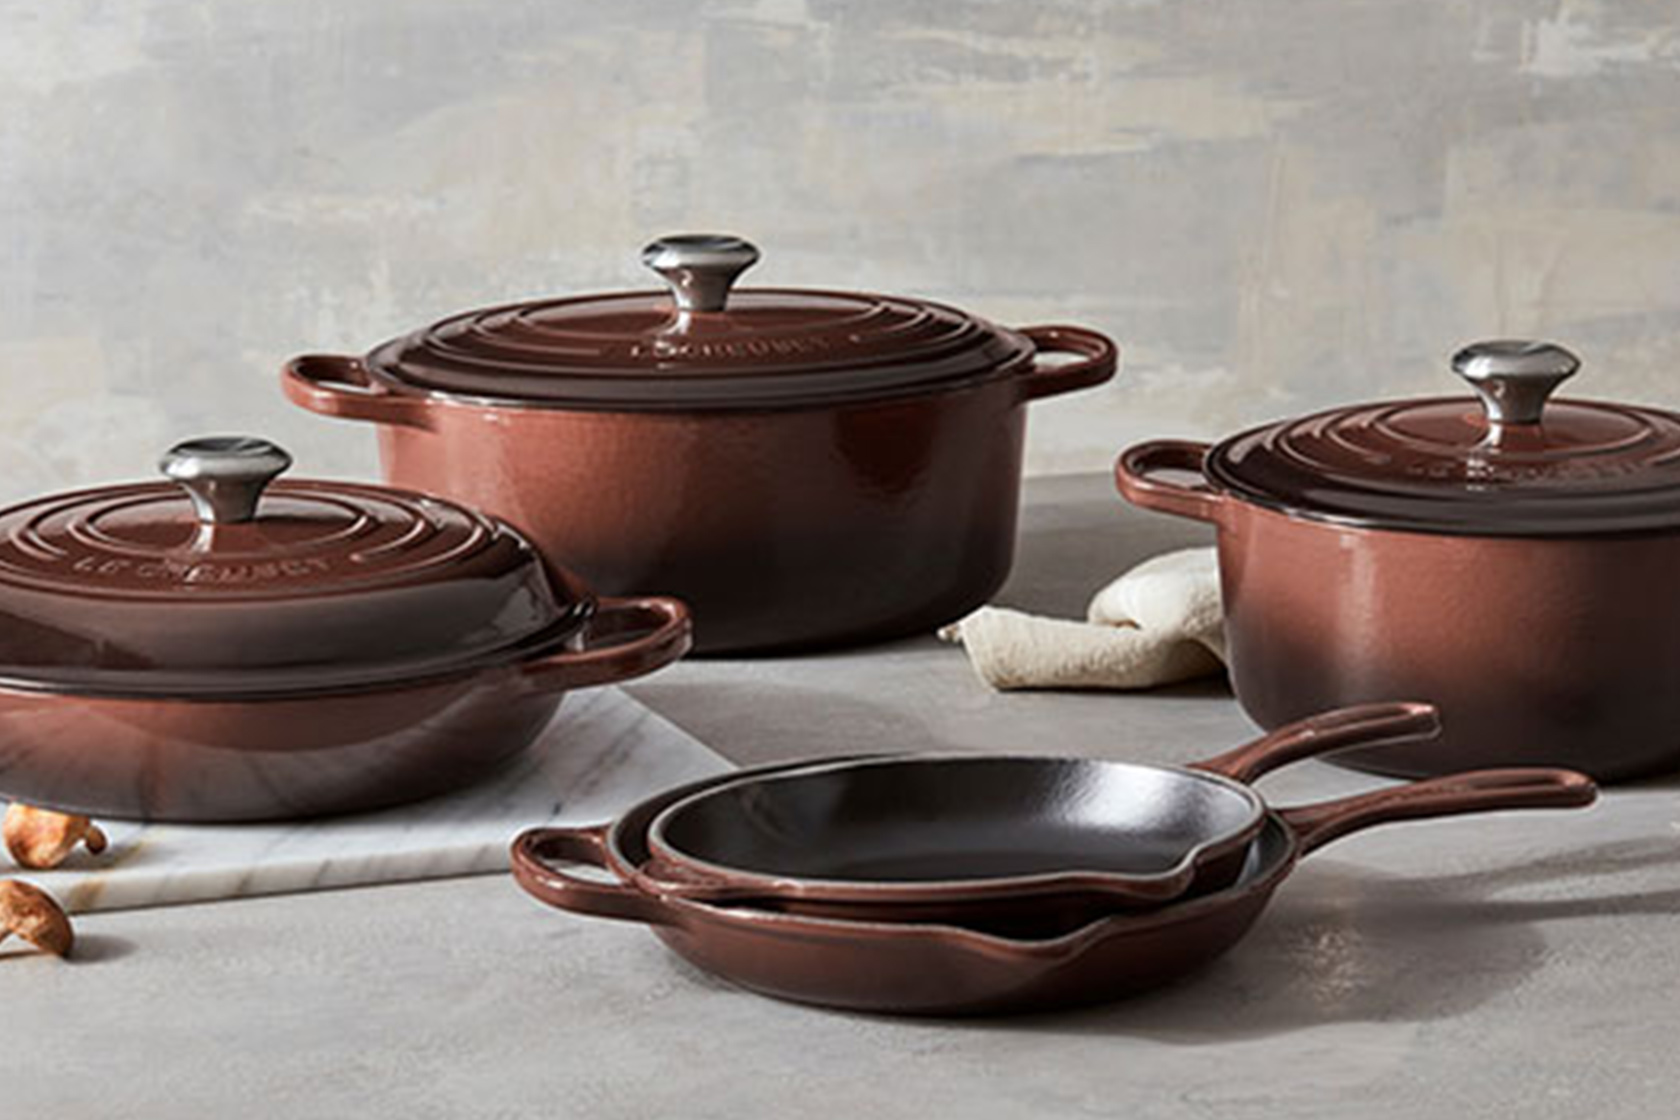 New Le Creuset color Where to buy Ganache cookware